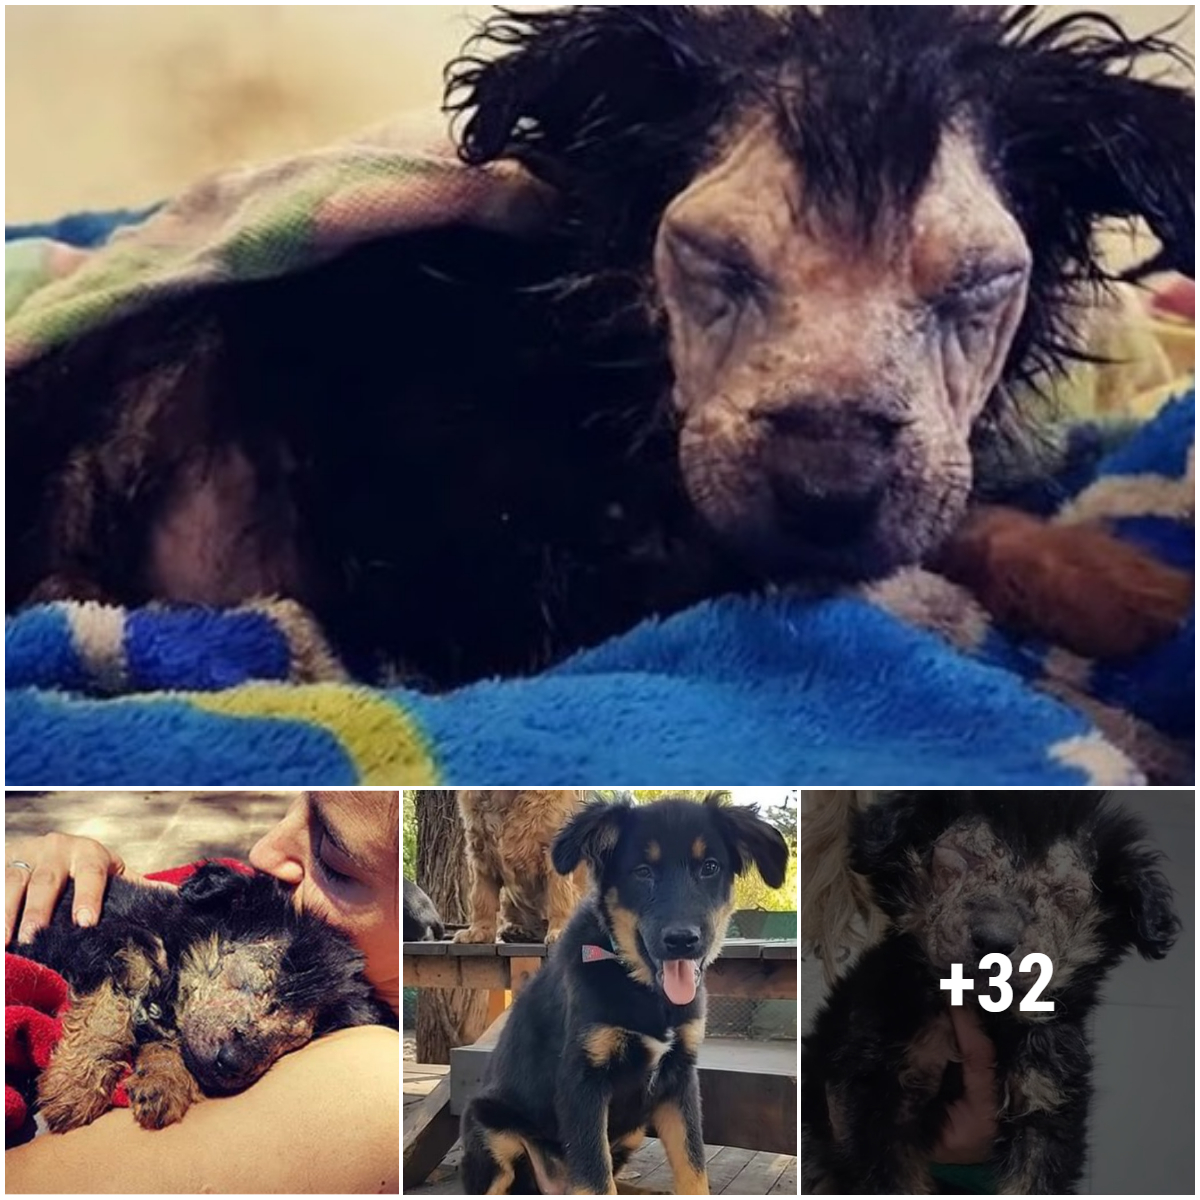 After the heavy loss this dog suffered from birth, he slept peacefully in the arms of the person who saved him, changing his entire life and transforming him without many people even realizing it.